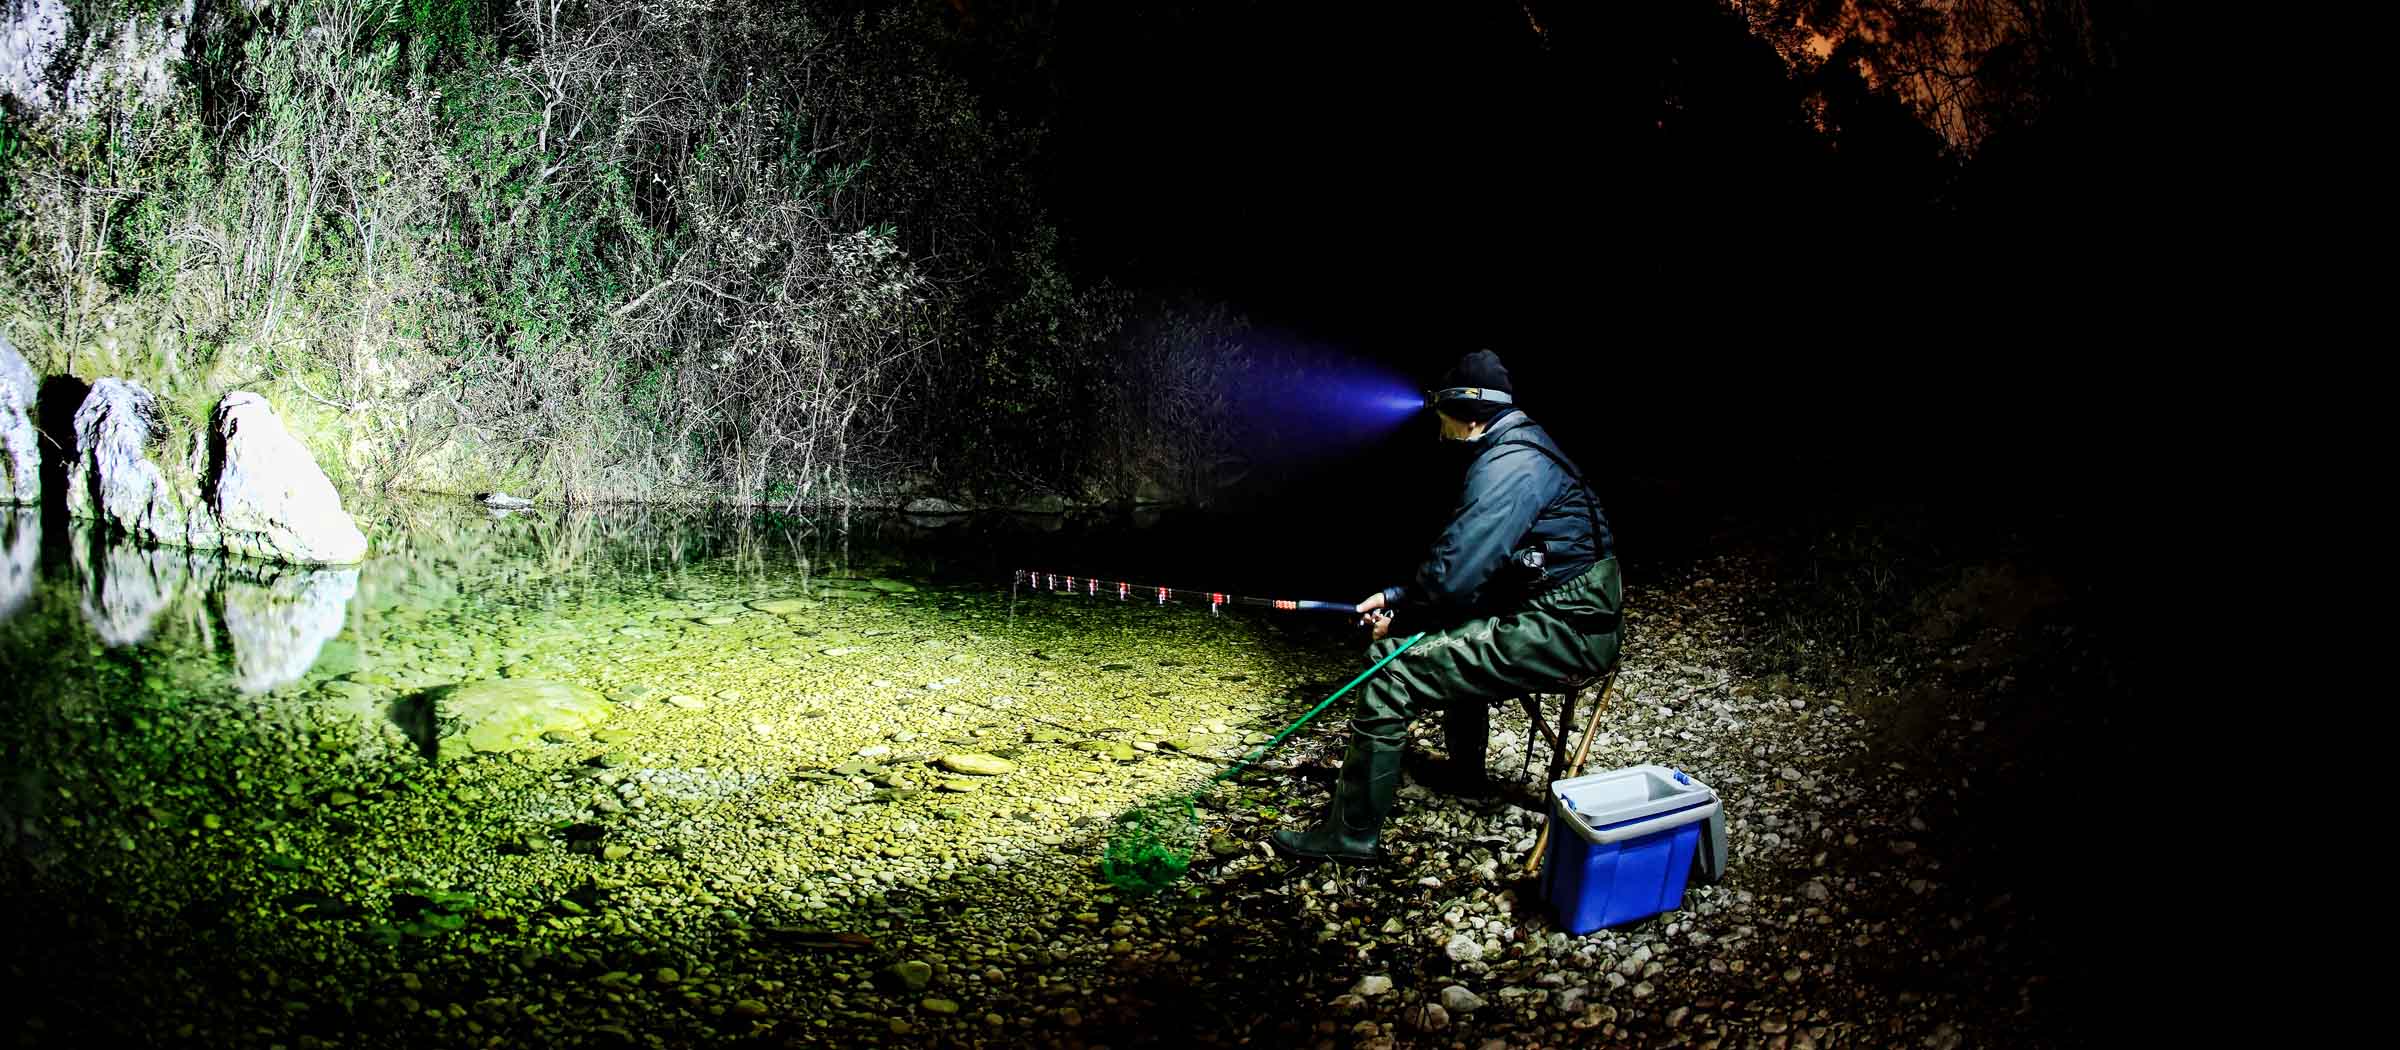 Features To Look for in Your Fishing Light: Best Flashlights and Best  Headlamps for Fishing This Summer - Fenix Lighting